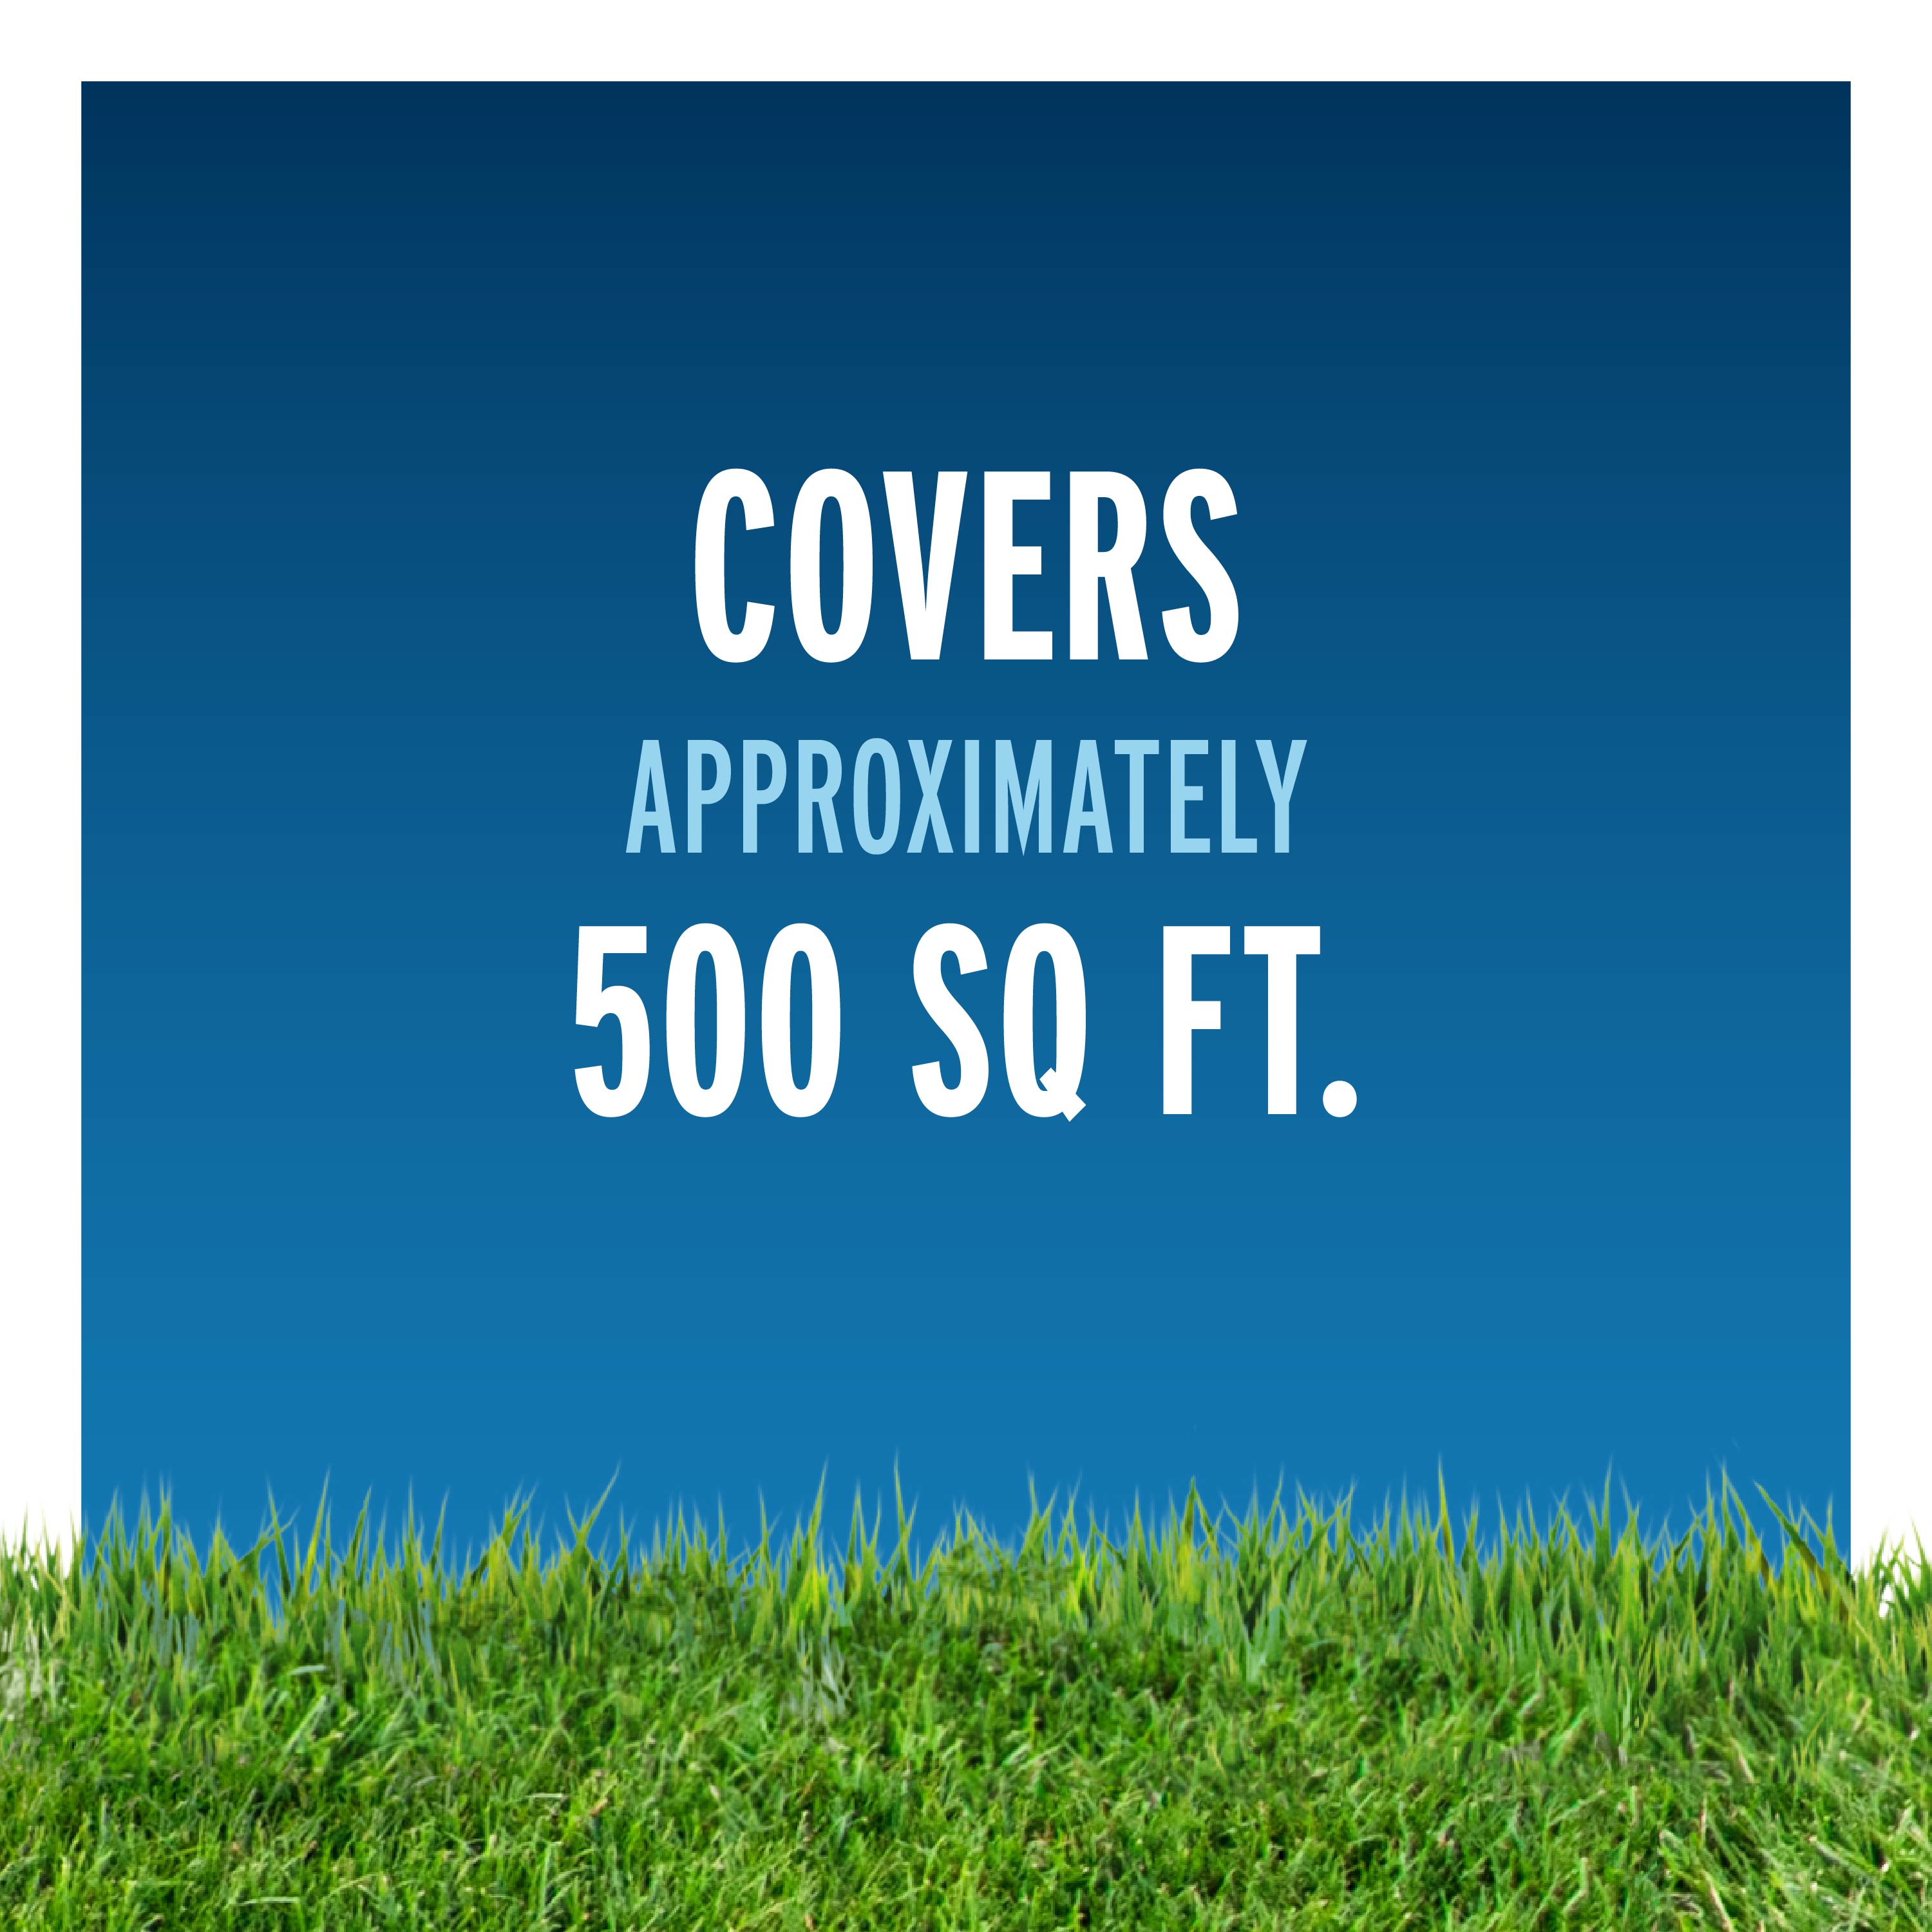 covers aprox. 500 sq. ft.